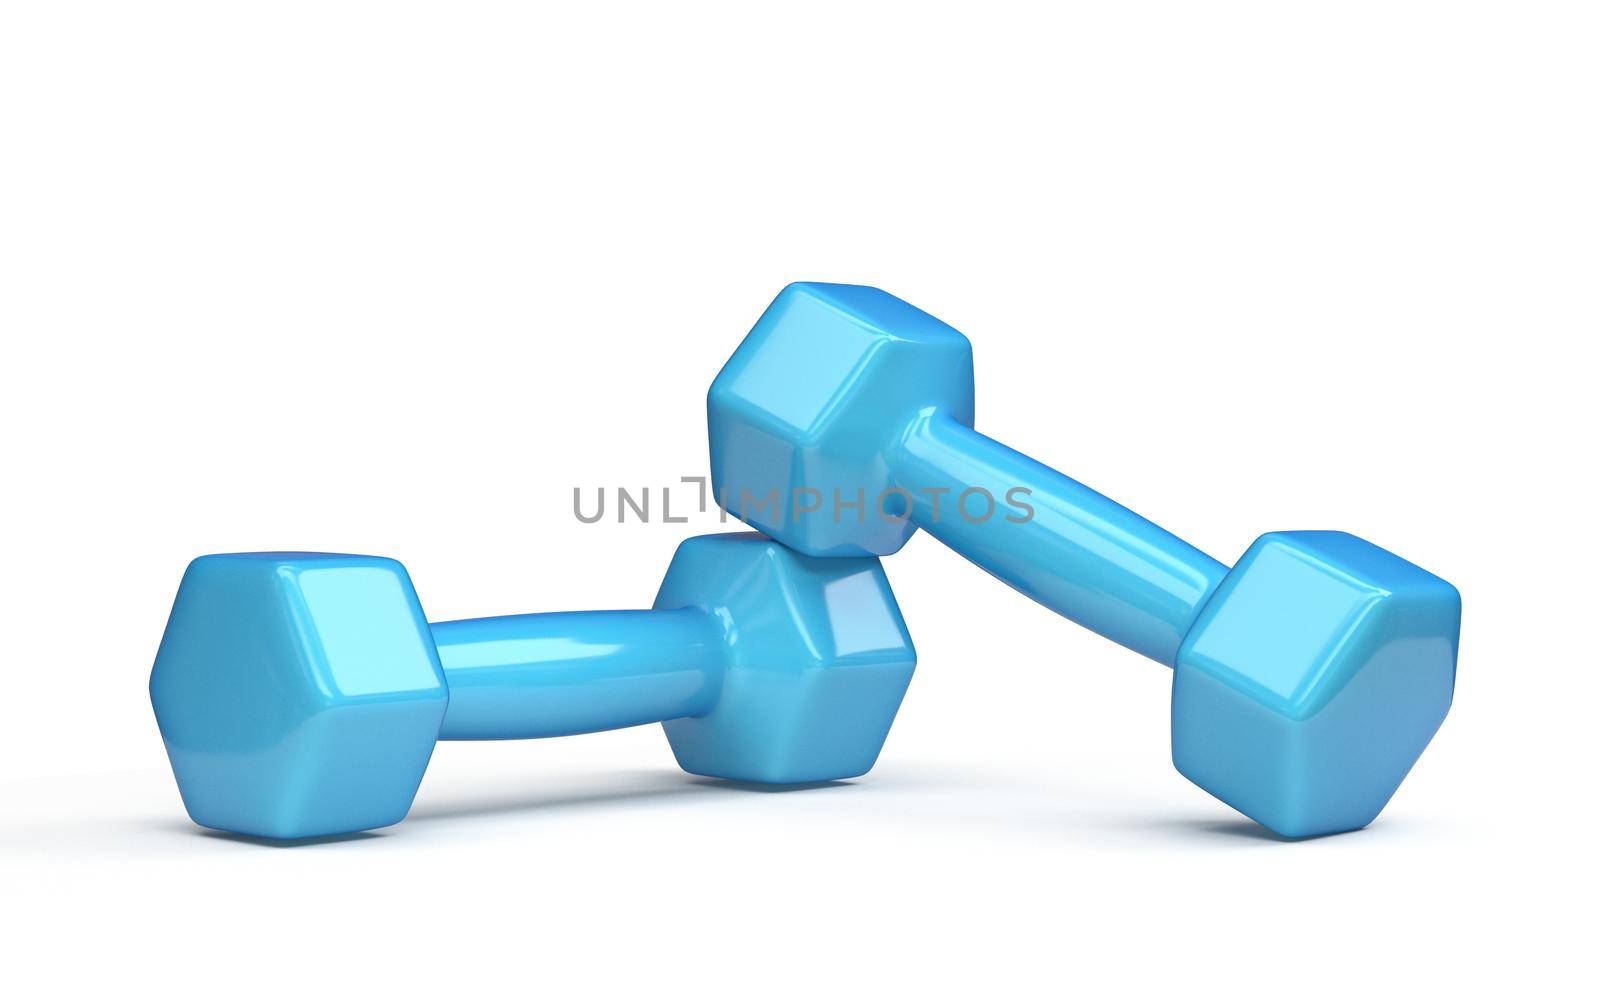 Blue fitness weights 3D rendering illustration isolated on white background